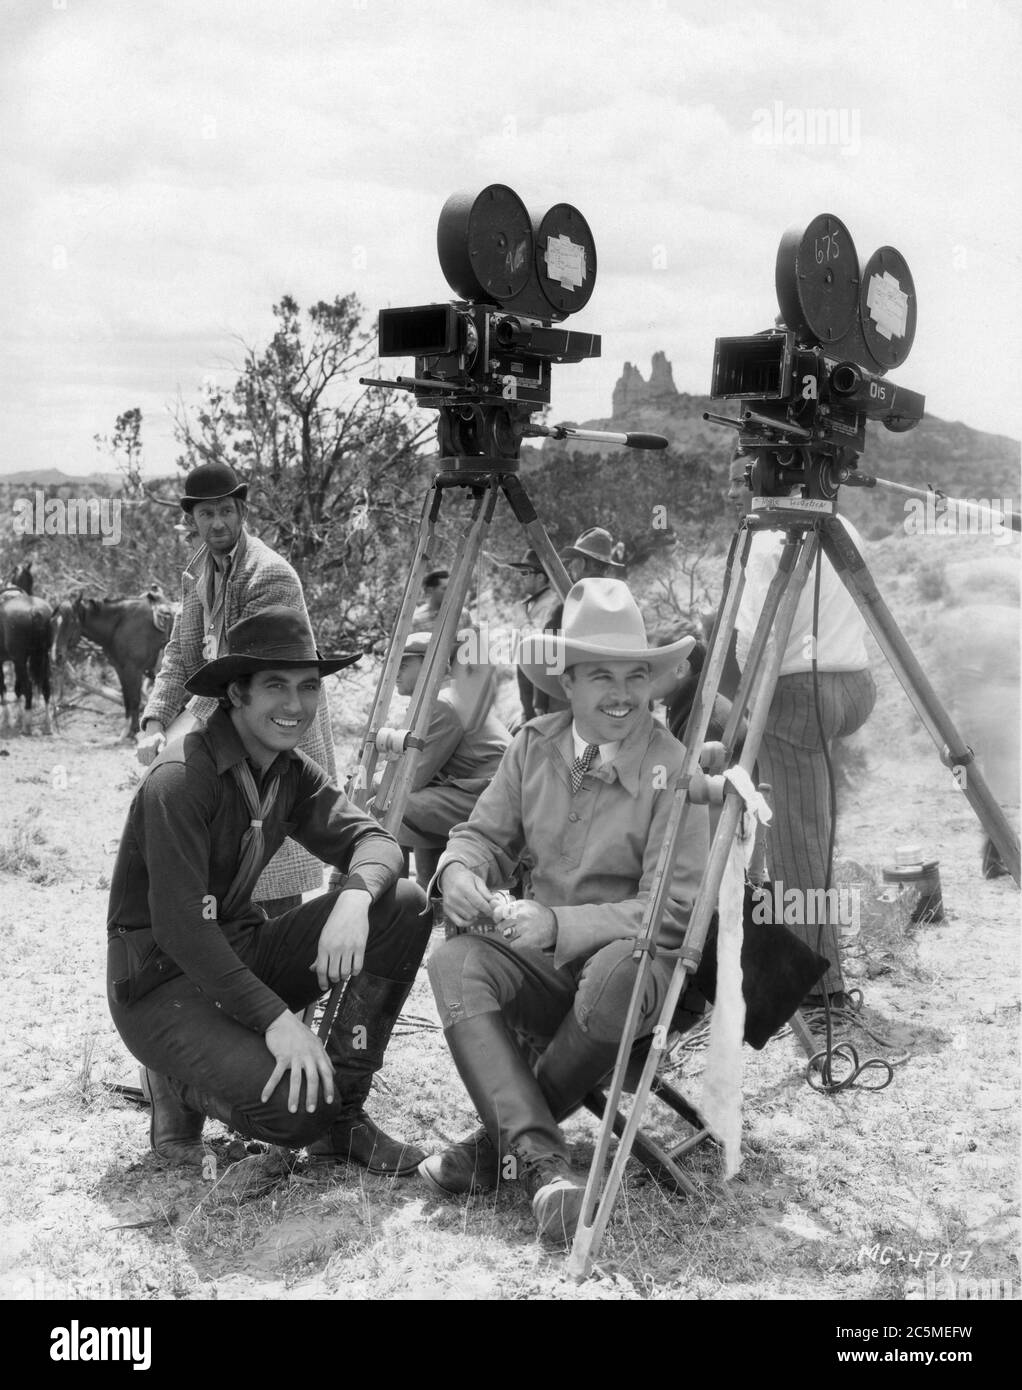 JOHNNY MACK BROWN and Director KING VIDOR with ROSCOE ATES and movie crew  on set location candid with 35mm and 70mm movie cameras during filming of  BILLY THE KID 1930 book Walter